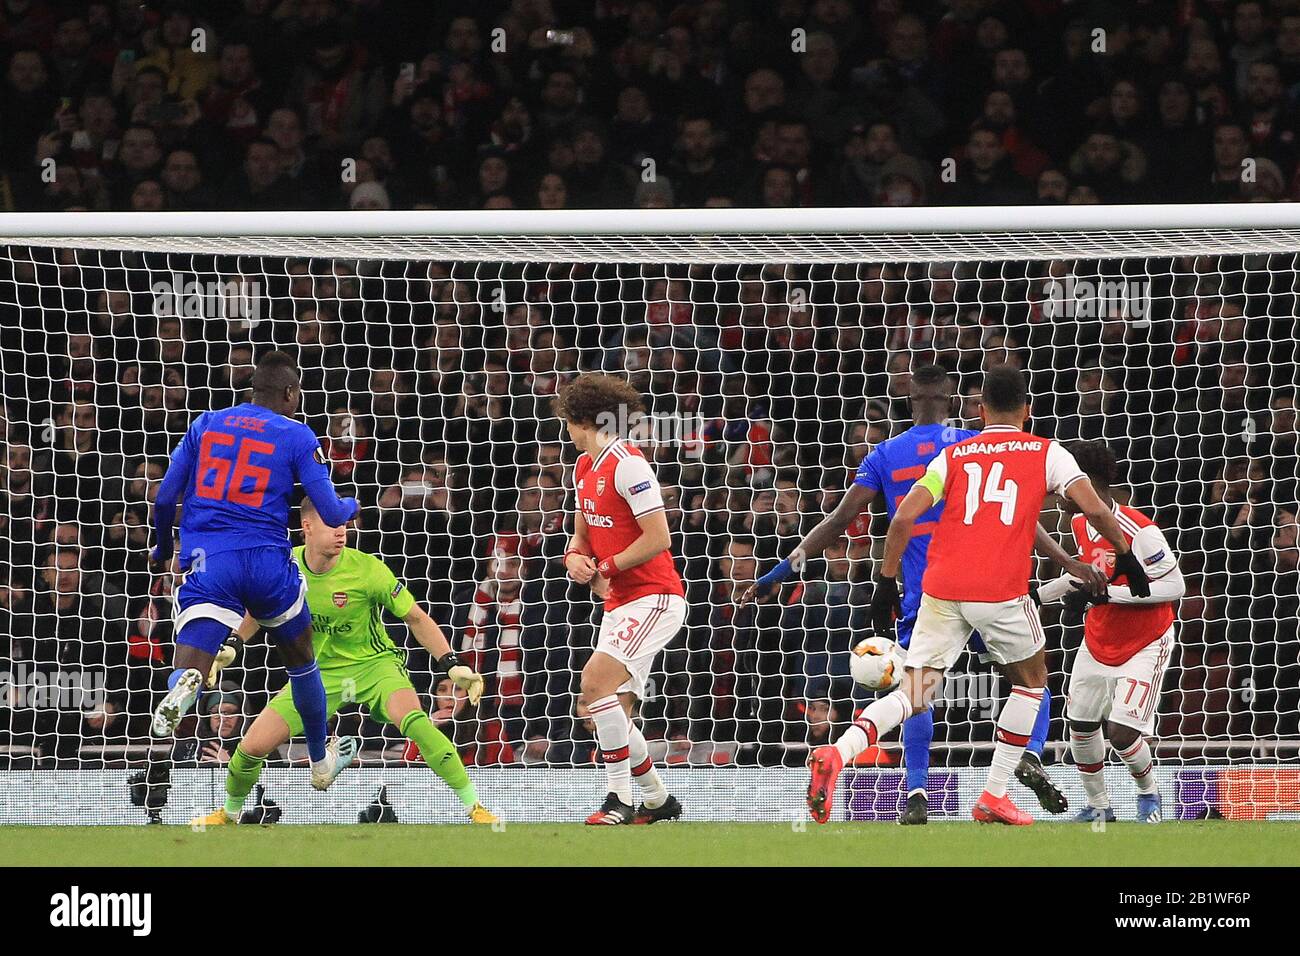 London, UK. 27th Feb, 2020. Pape Abou Cisse of Olympiakos (66) scores his  team's first goal. UEFA Europa league, round of 32, 2nd leg match, Arsenal  v Olympiacos at the Emirates Stadium